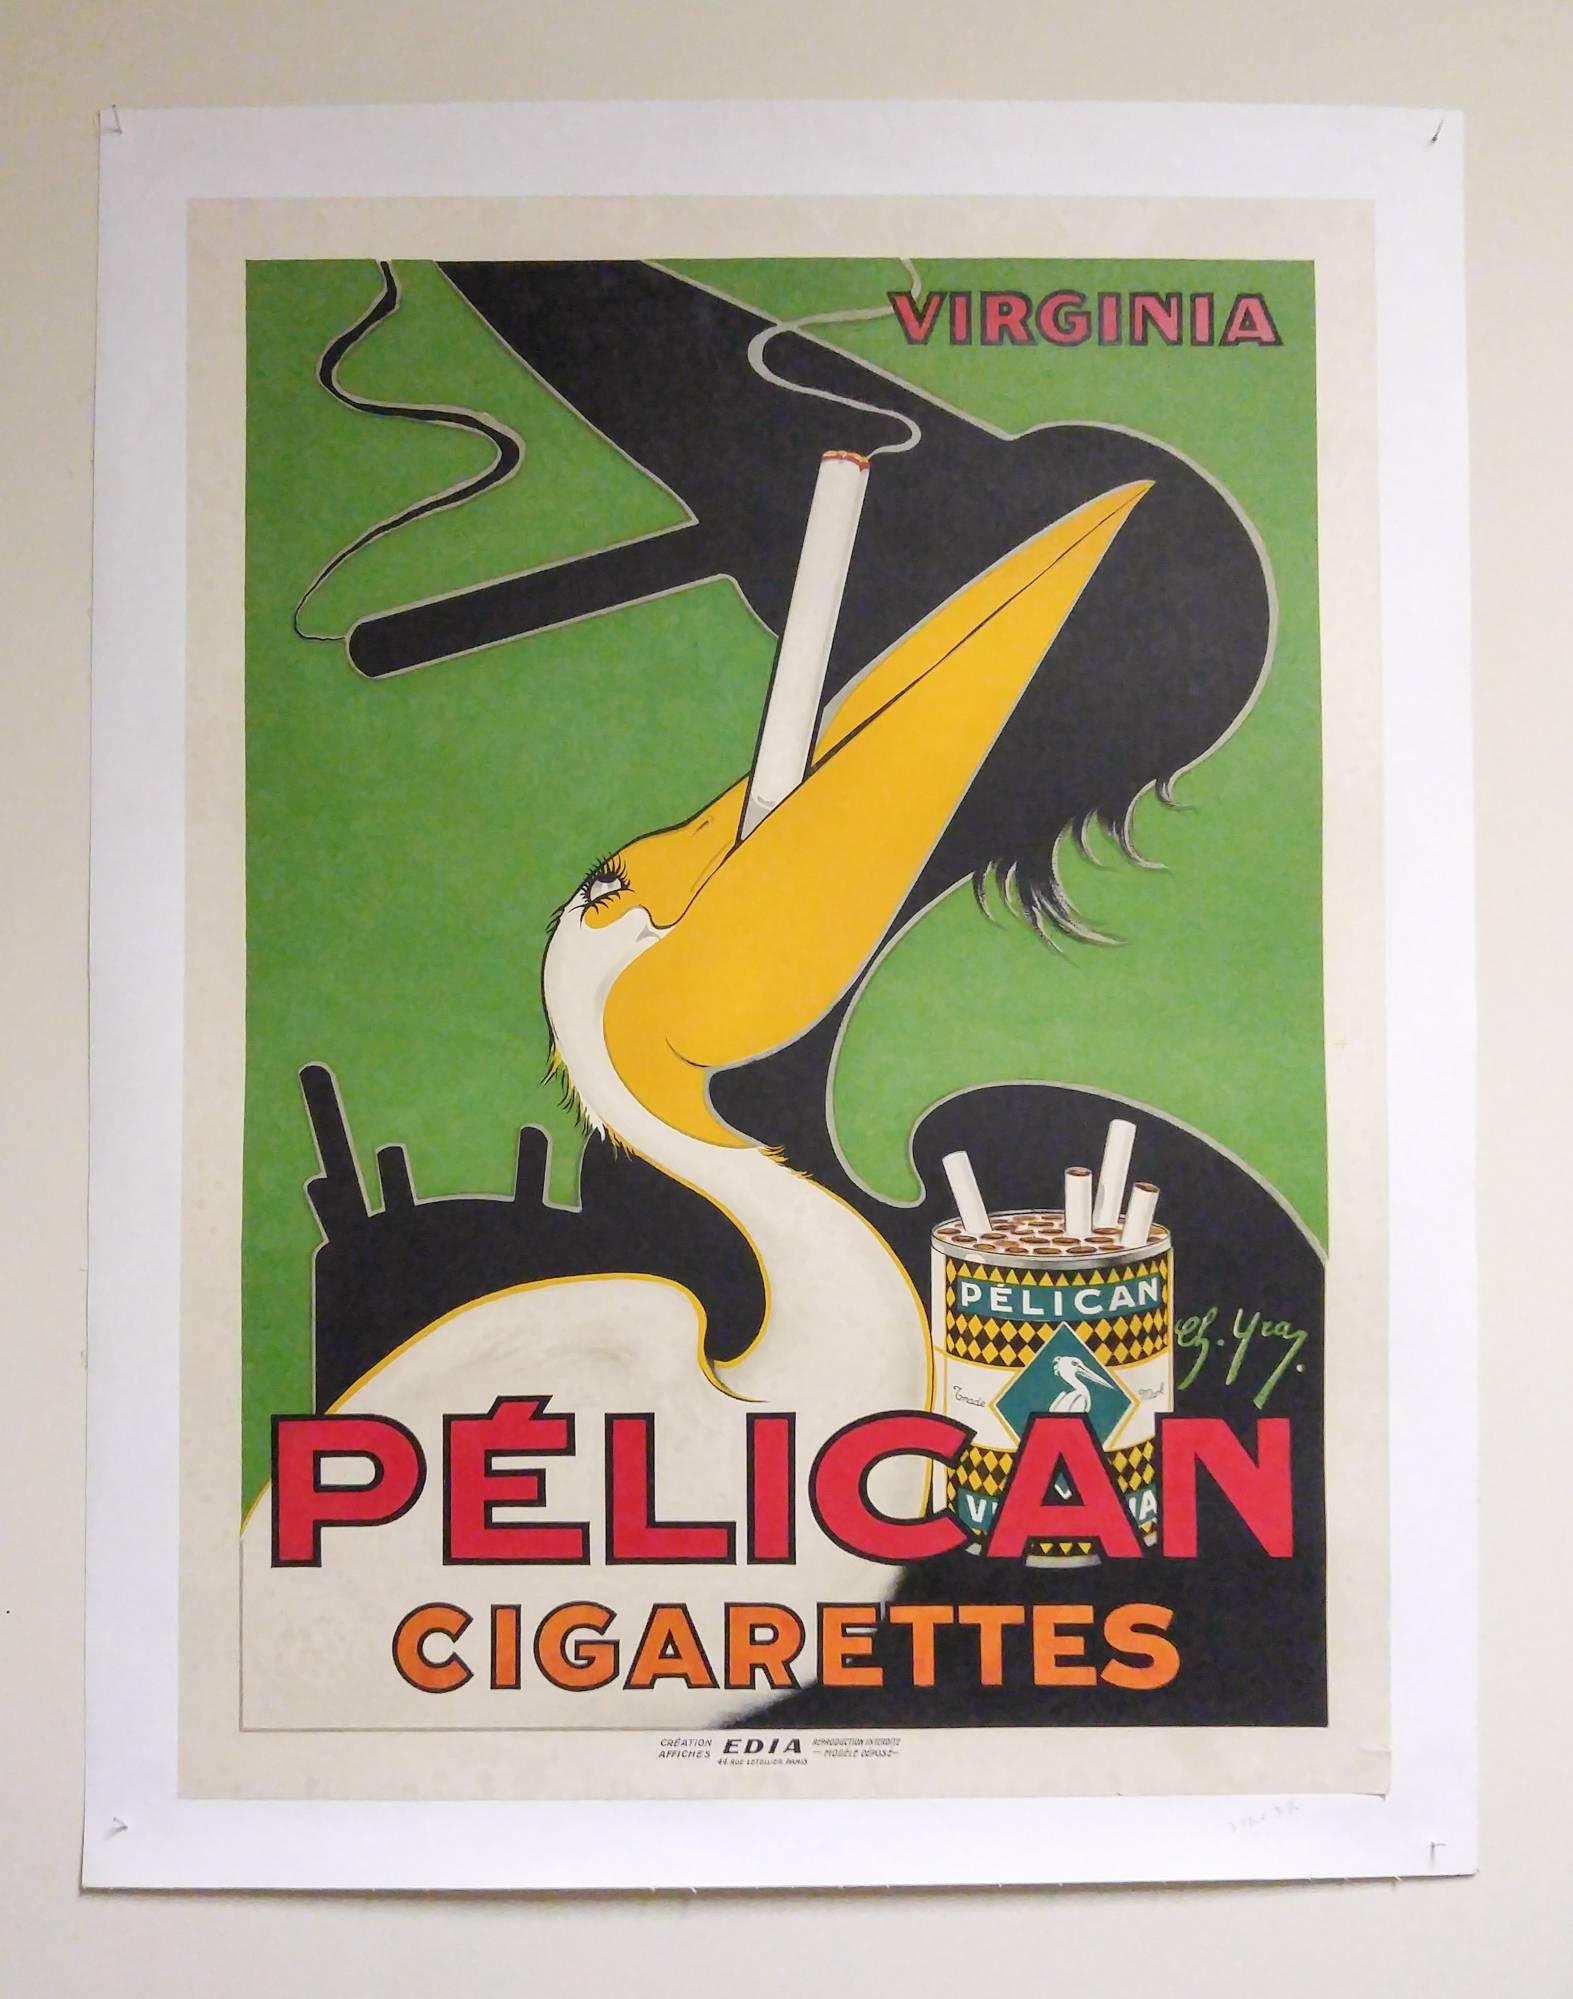 Pelican cigarettes French poster, circa 1925 by Charles Yray, advertising Virginia tobacco stylishly packaged. The poster is quintessentially Art Deco with the reverse Silhouette an interesting part of the design. Lithograph on paper mounted on